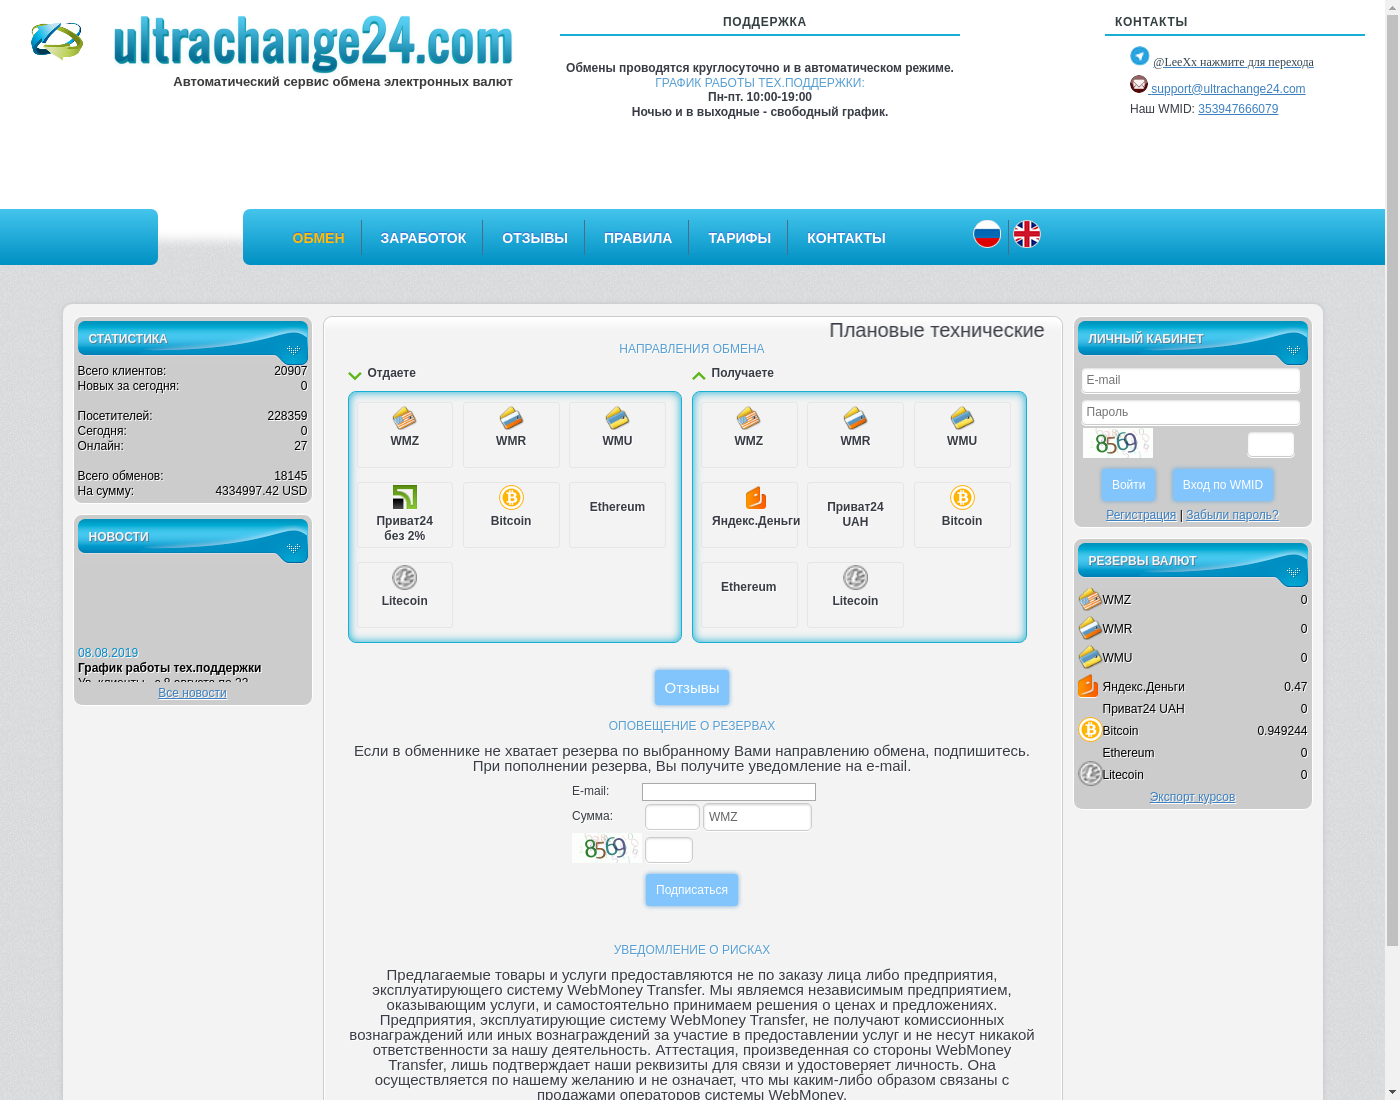 ultrachange24 user interface: the home page in English